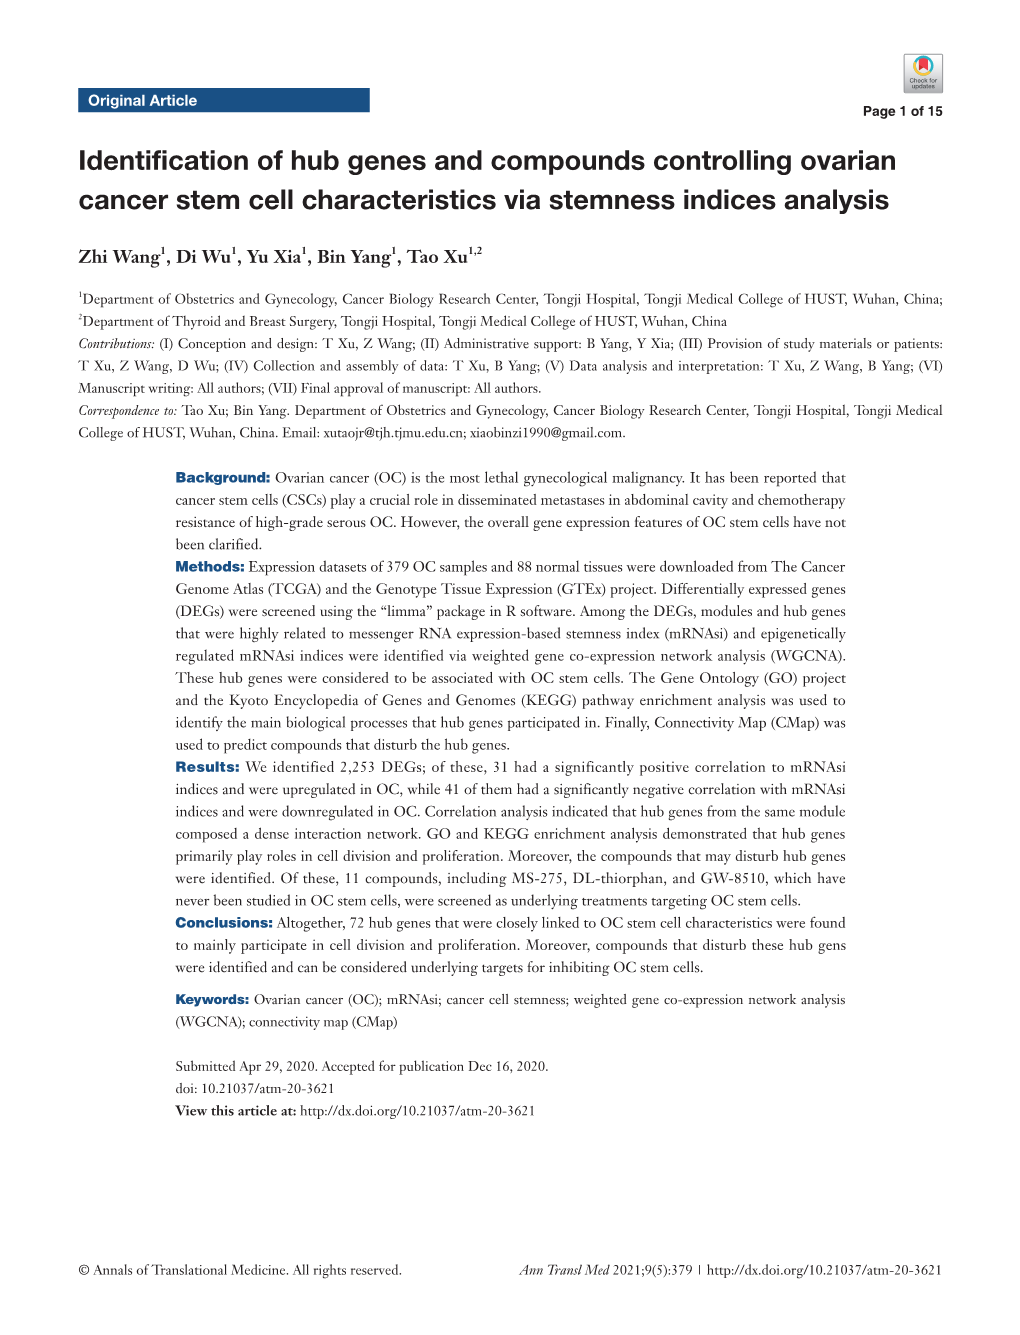 Identification of Hub Genes and Compounds Controlling Ovarian Cancer Stem Cell Characteristics Via Stemness Indices Analysis